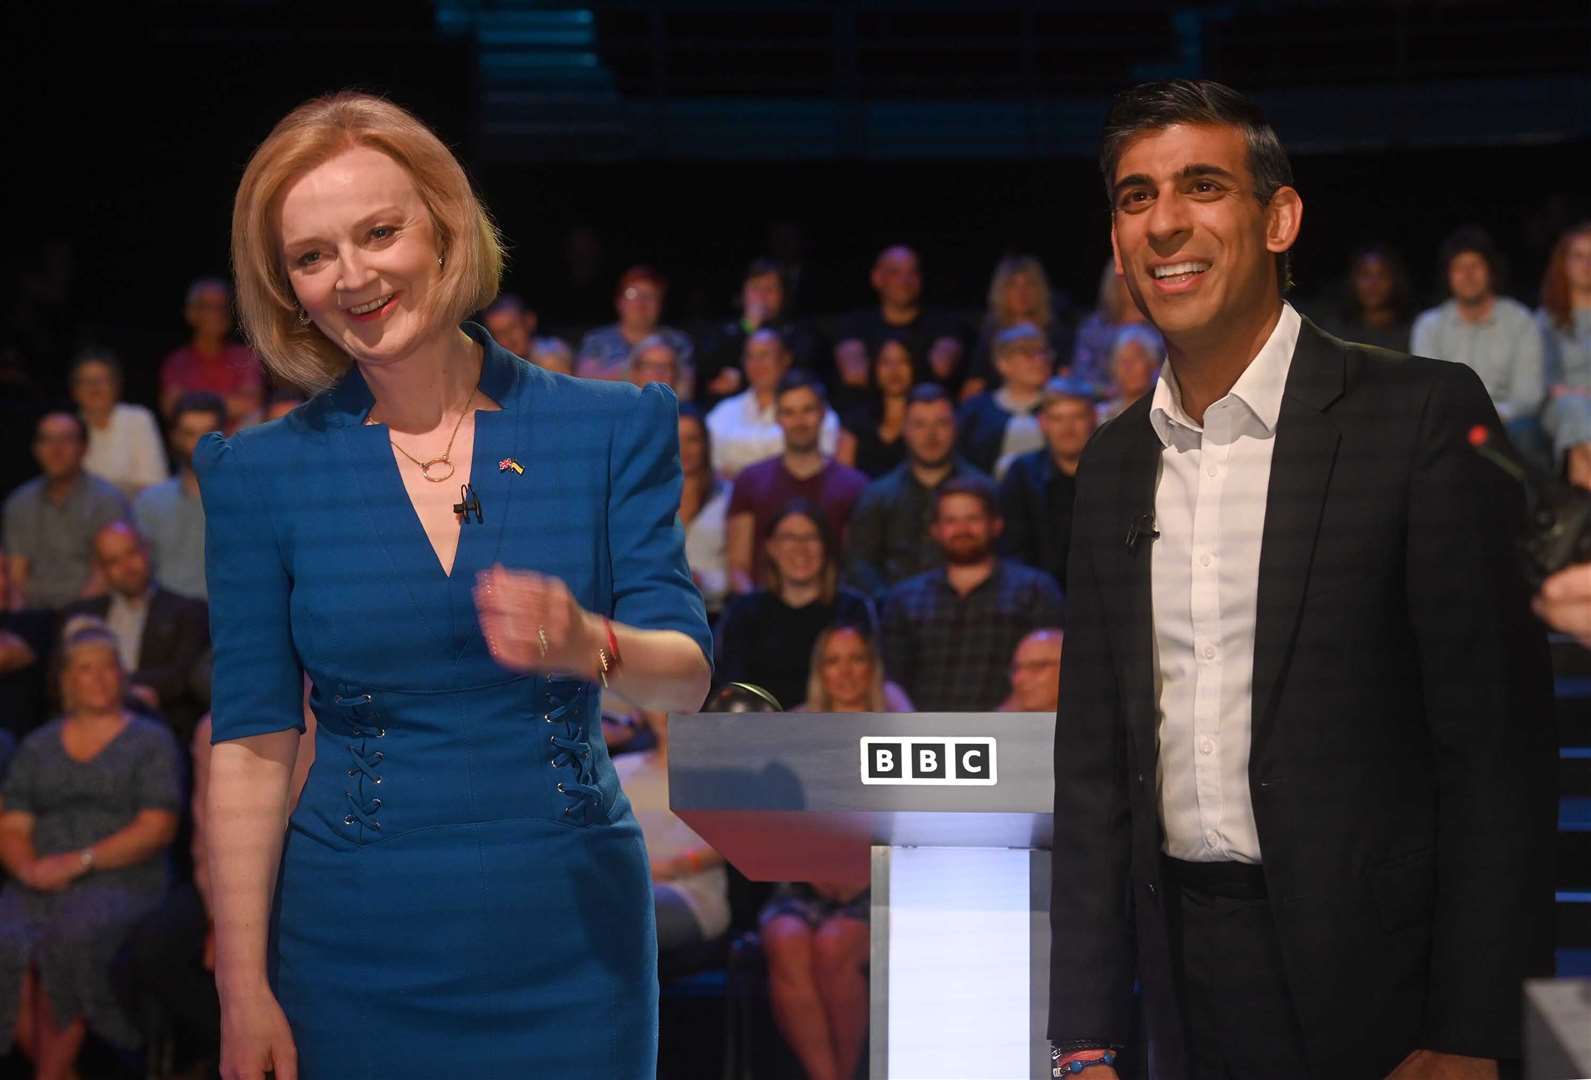 Liz Truss and Rishi Sunak before taking part in the BBC1 Conservative leadership debate (Jeff Overs/BBC/PA)